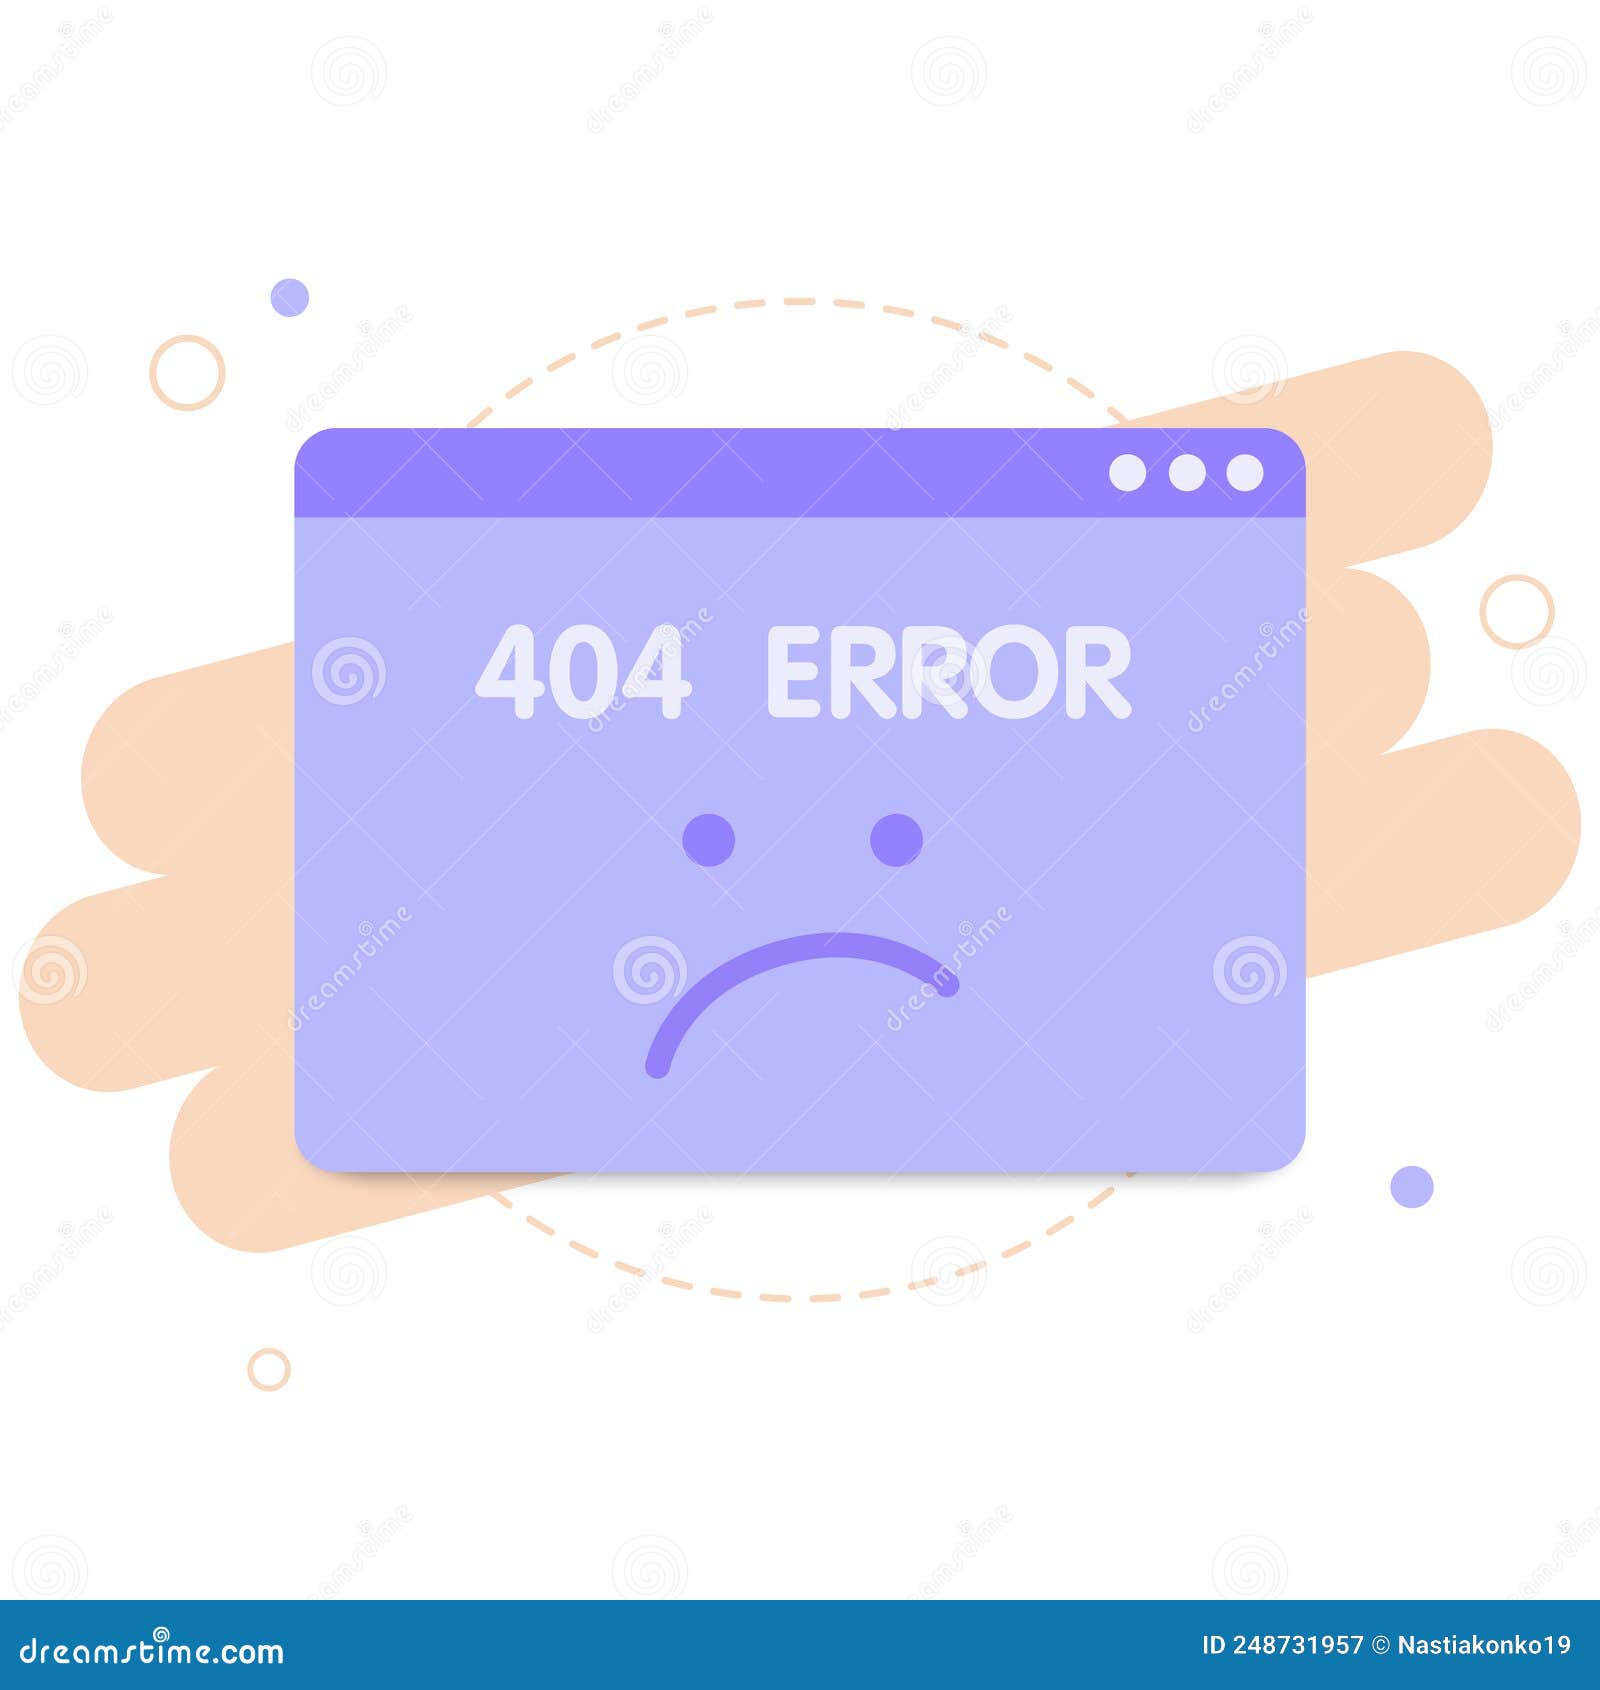 404 error page templates.  concept s of page not found. flat cartoon style. 